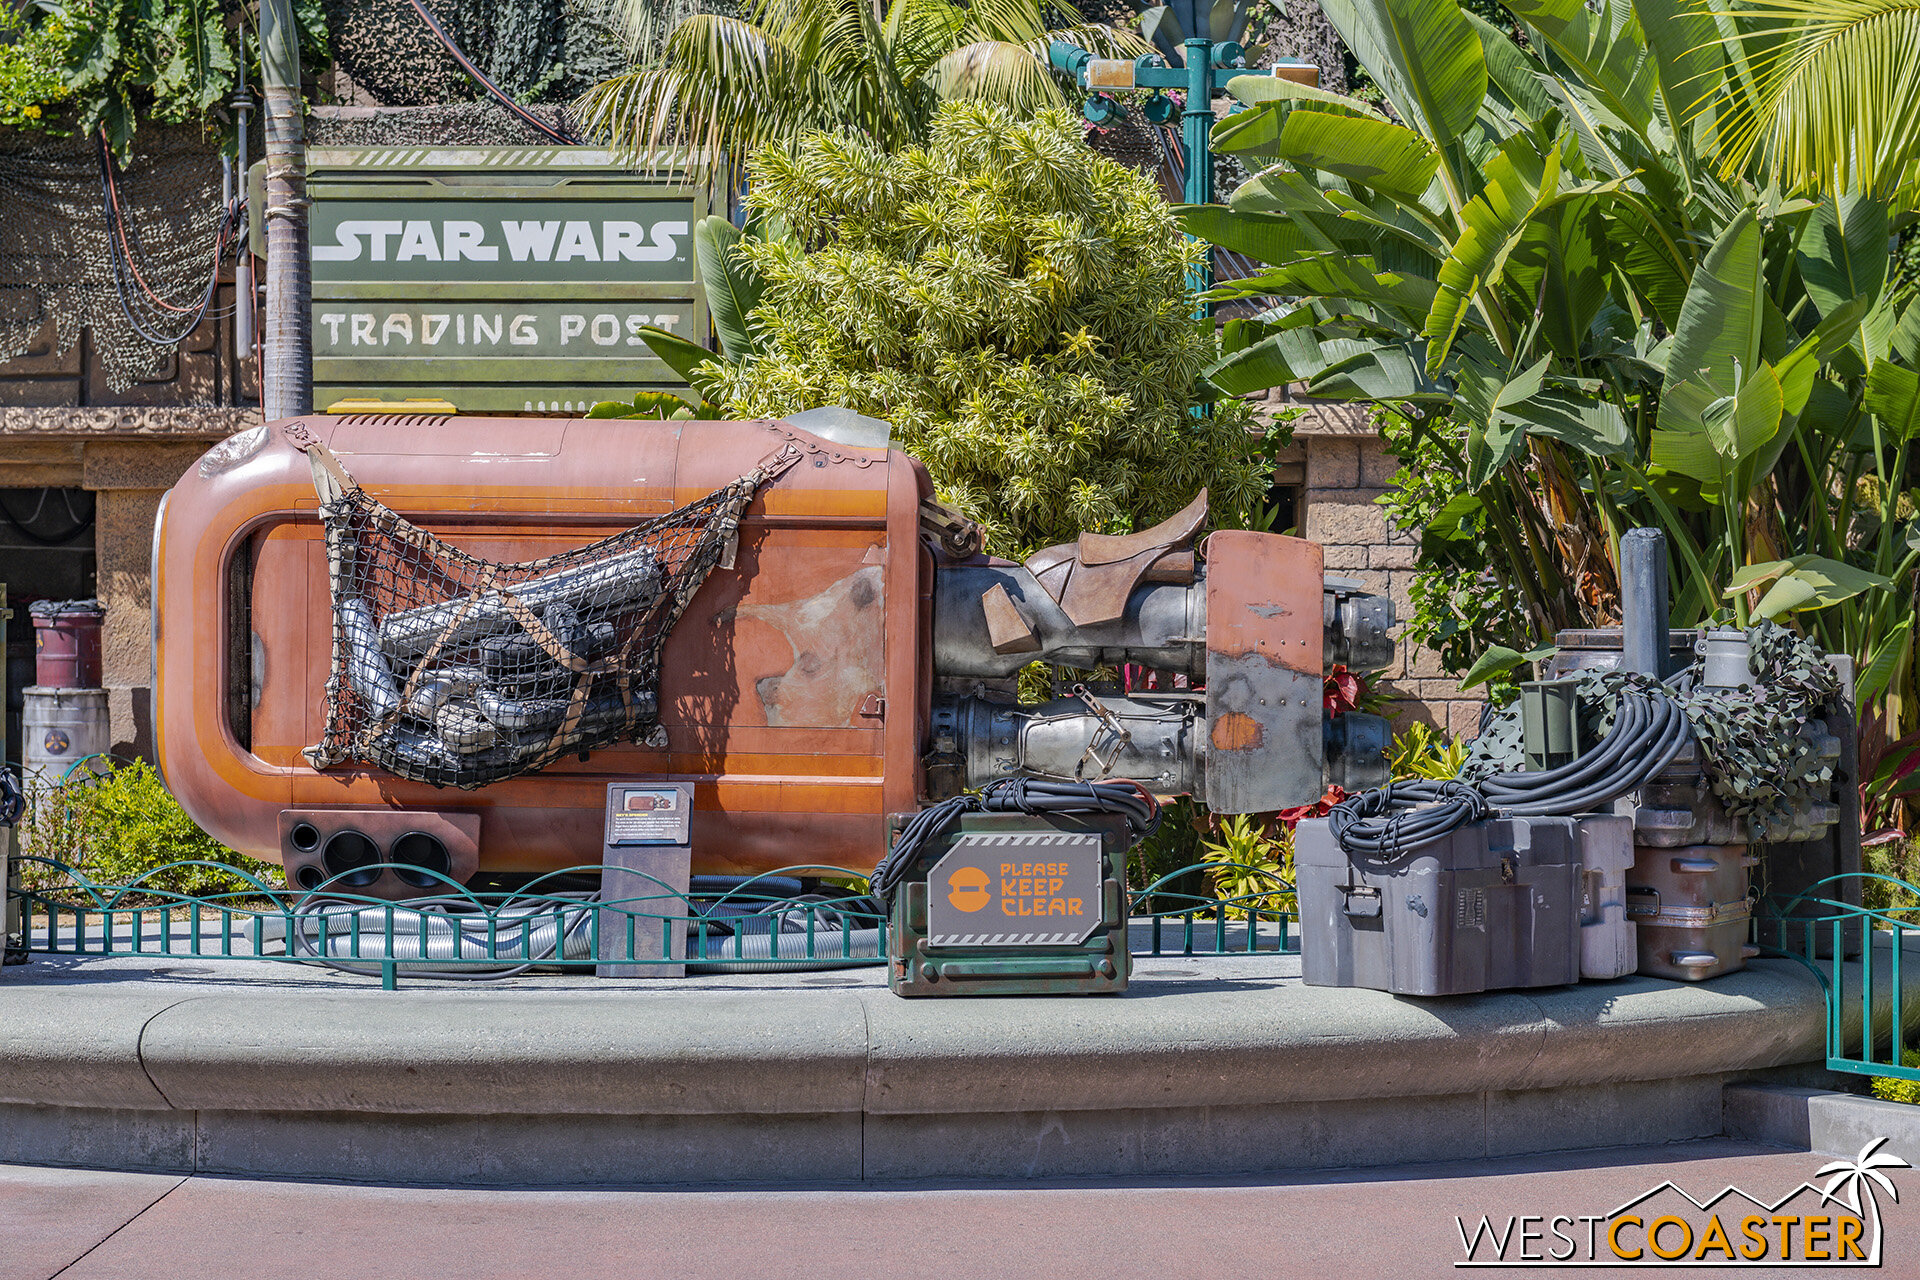  It might be a giveaway to park your speeder outside, though.   